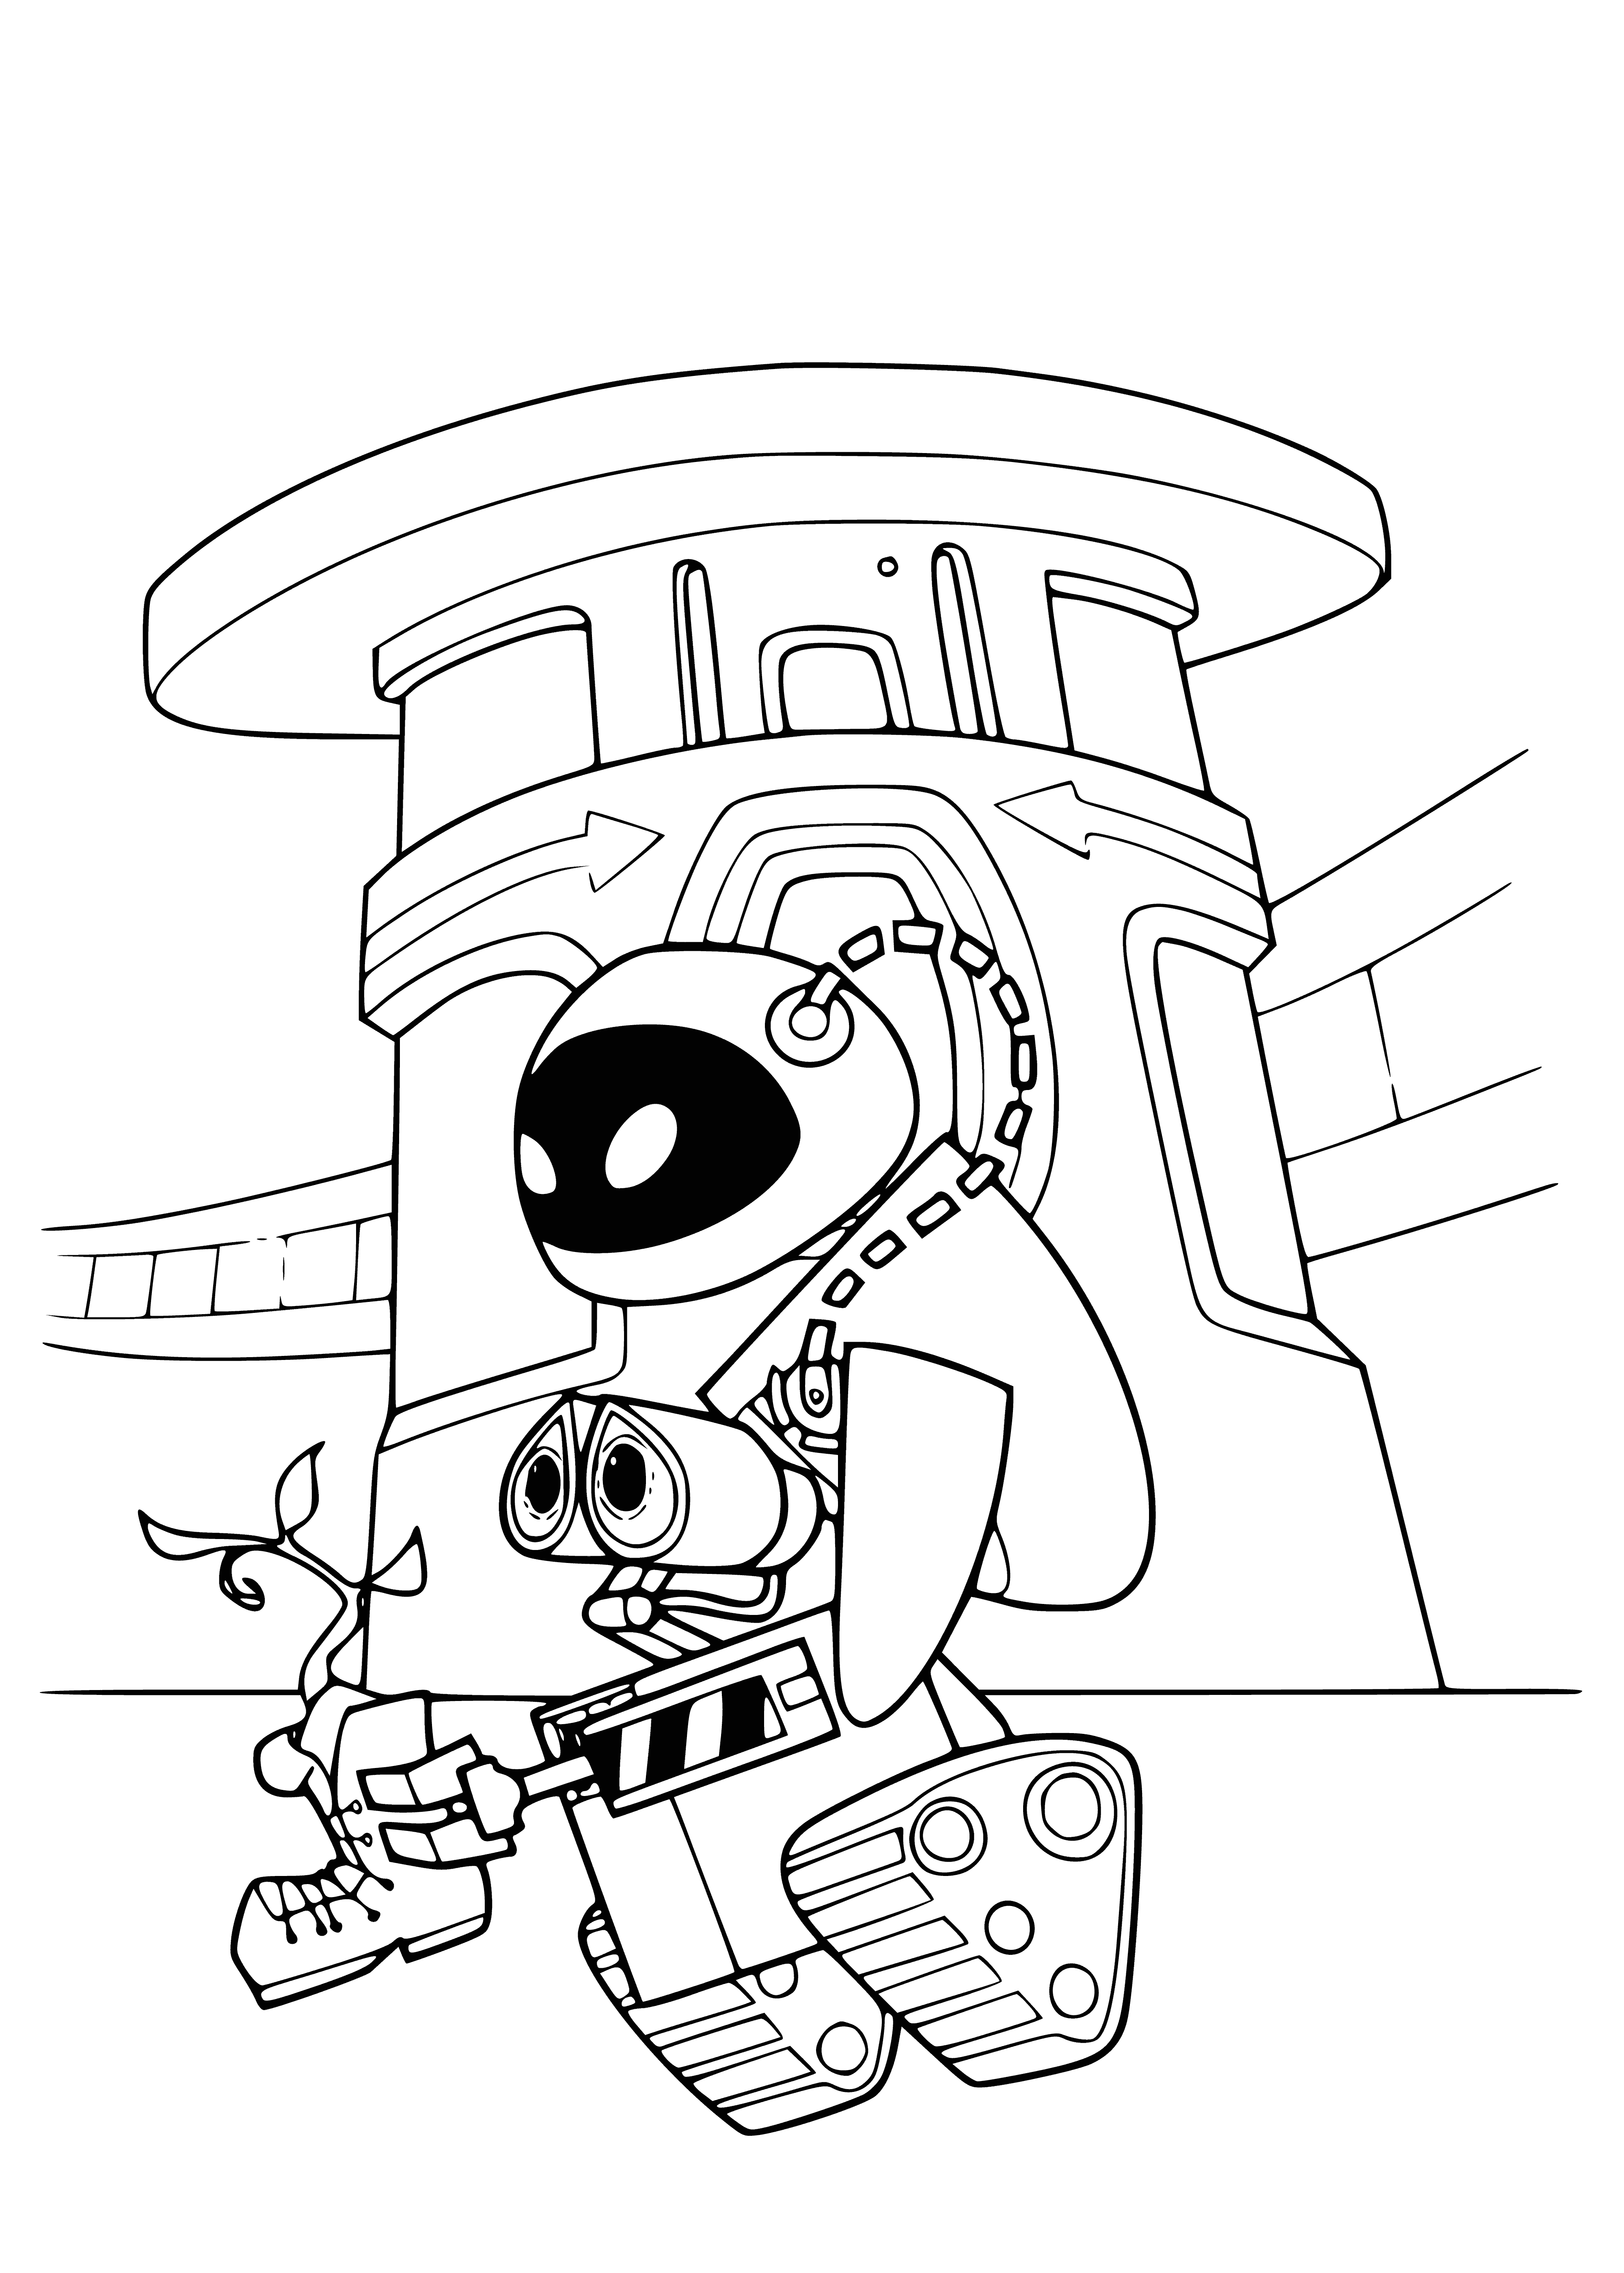 coloring page: WALL-E & EVE stand in front of a beautiful valley, admiring and loving each other. #RobotsInLove